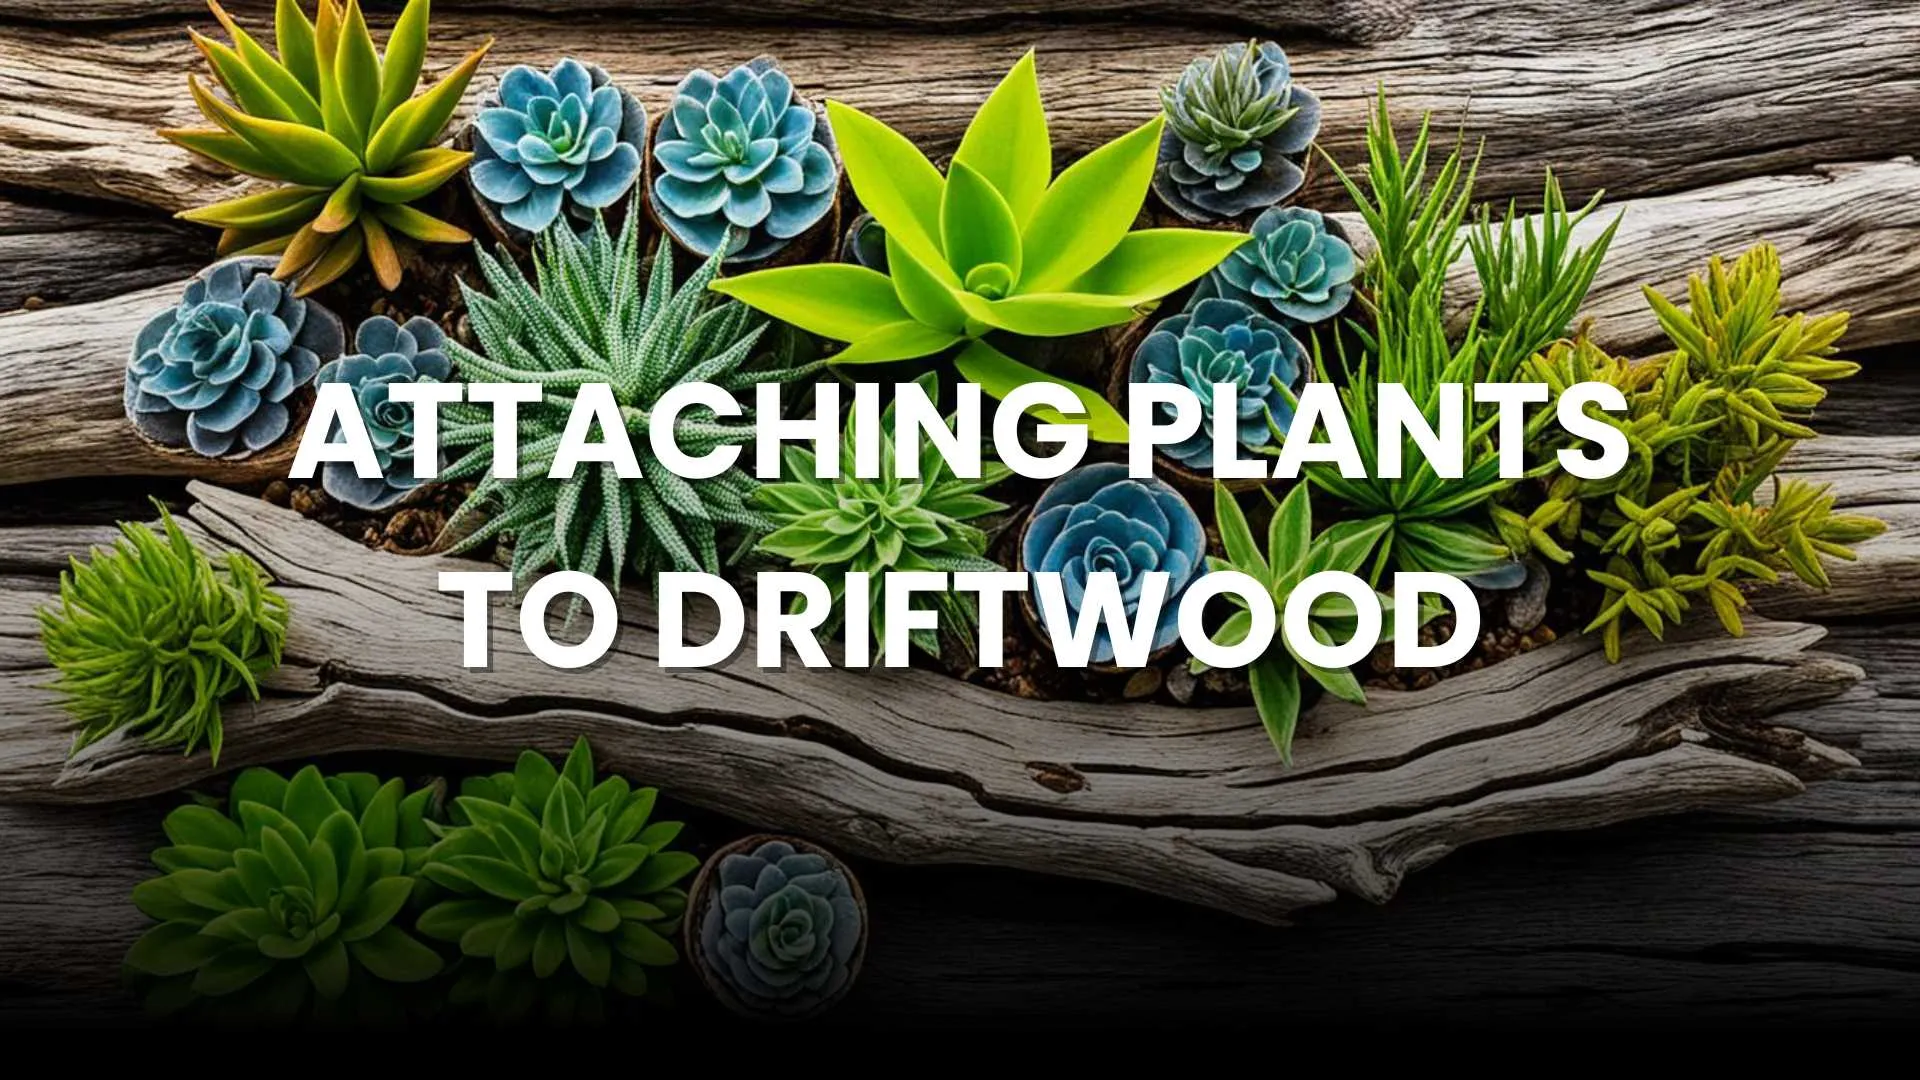 Easy Guide to Attaching Plants to Driftwood